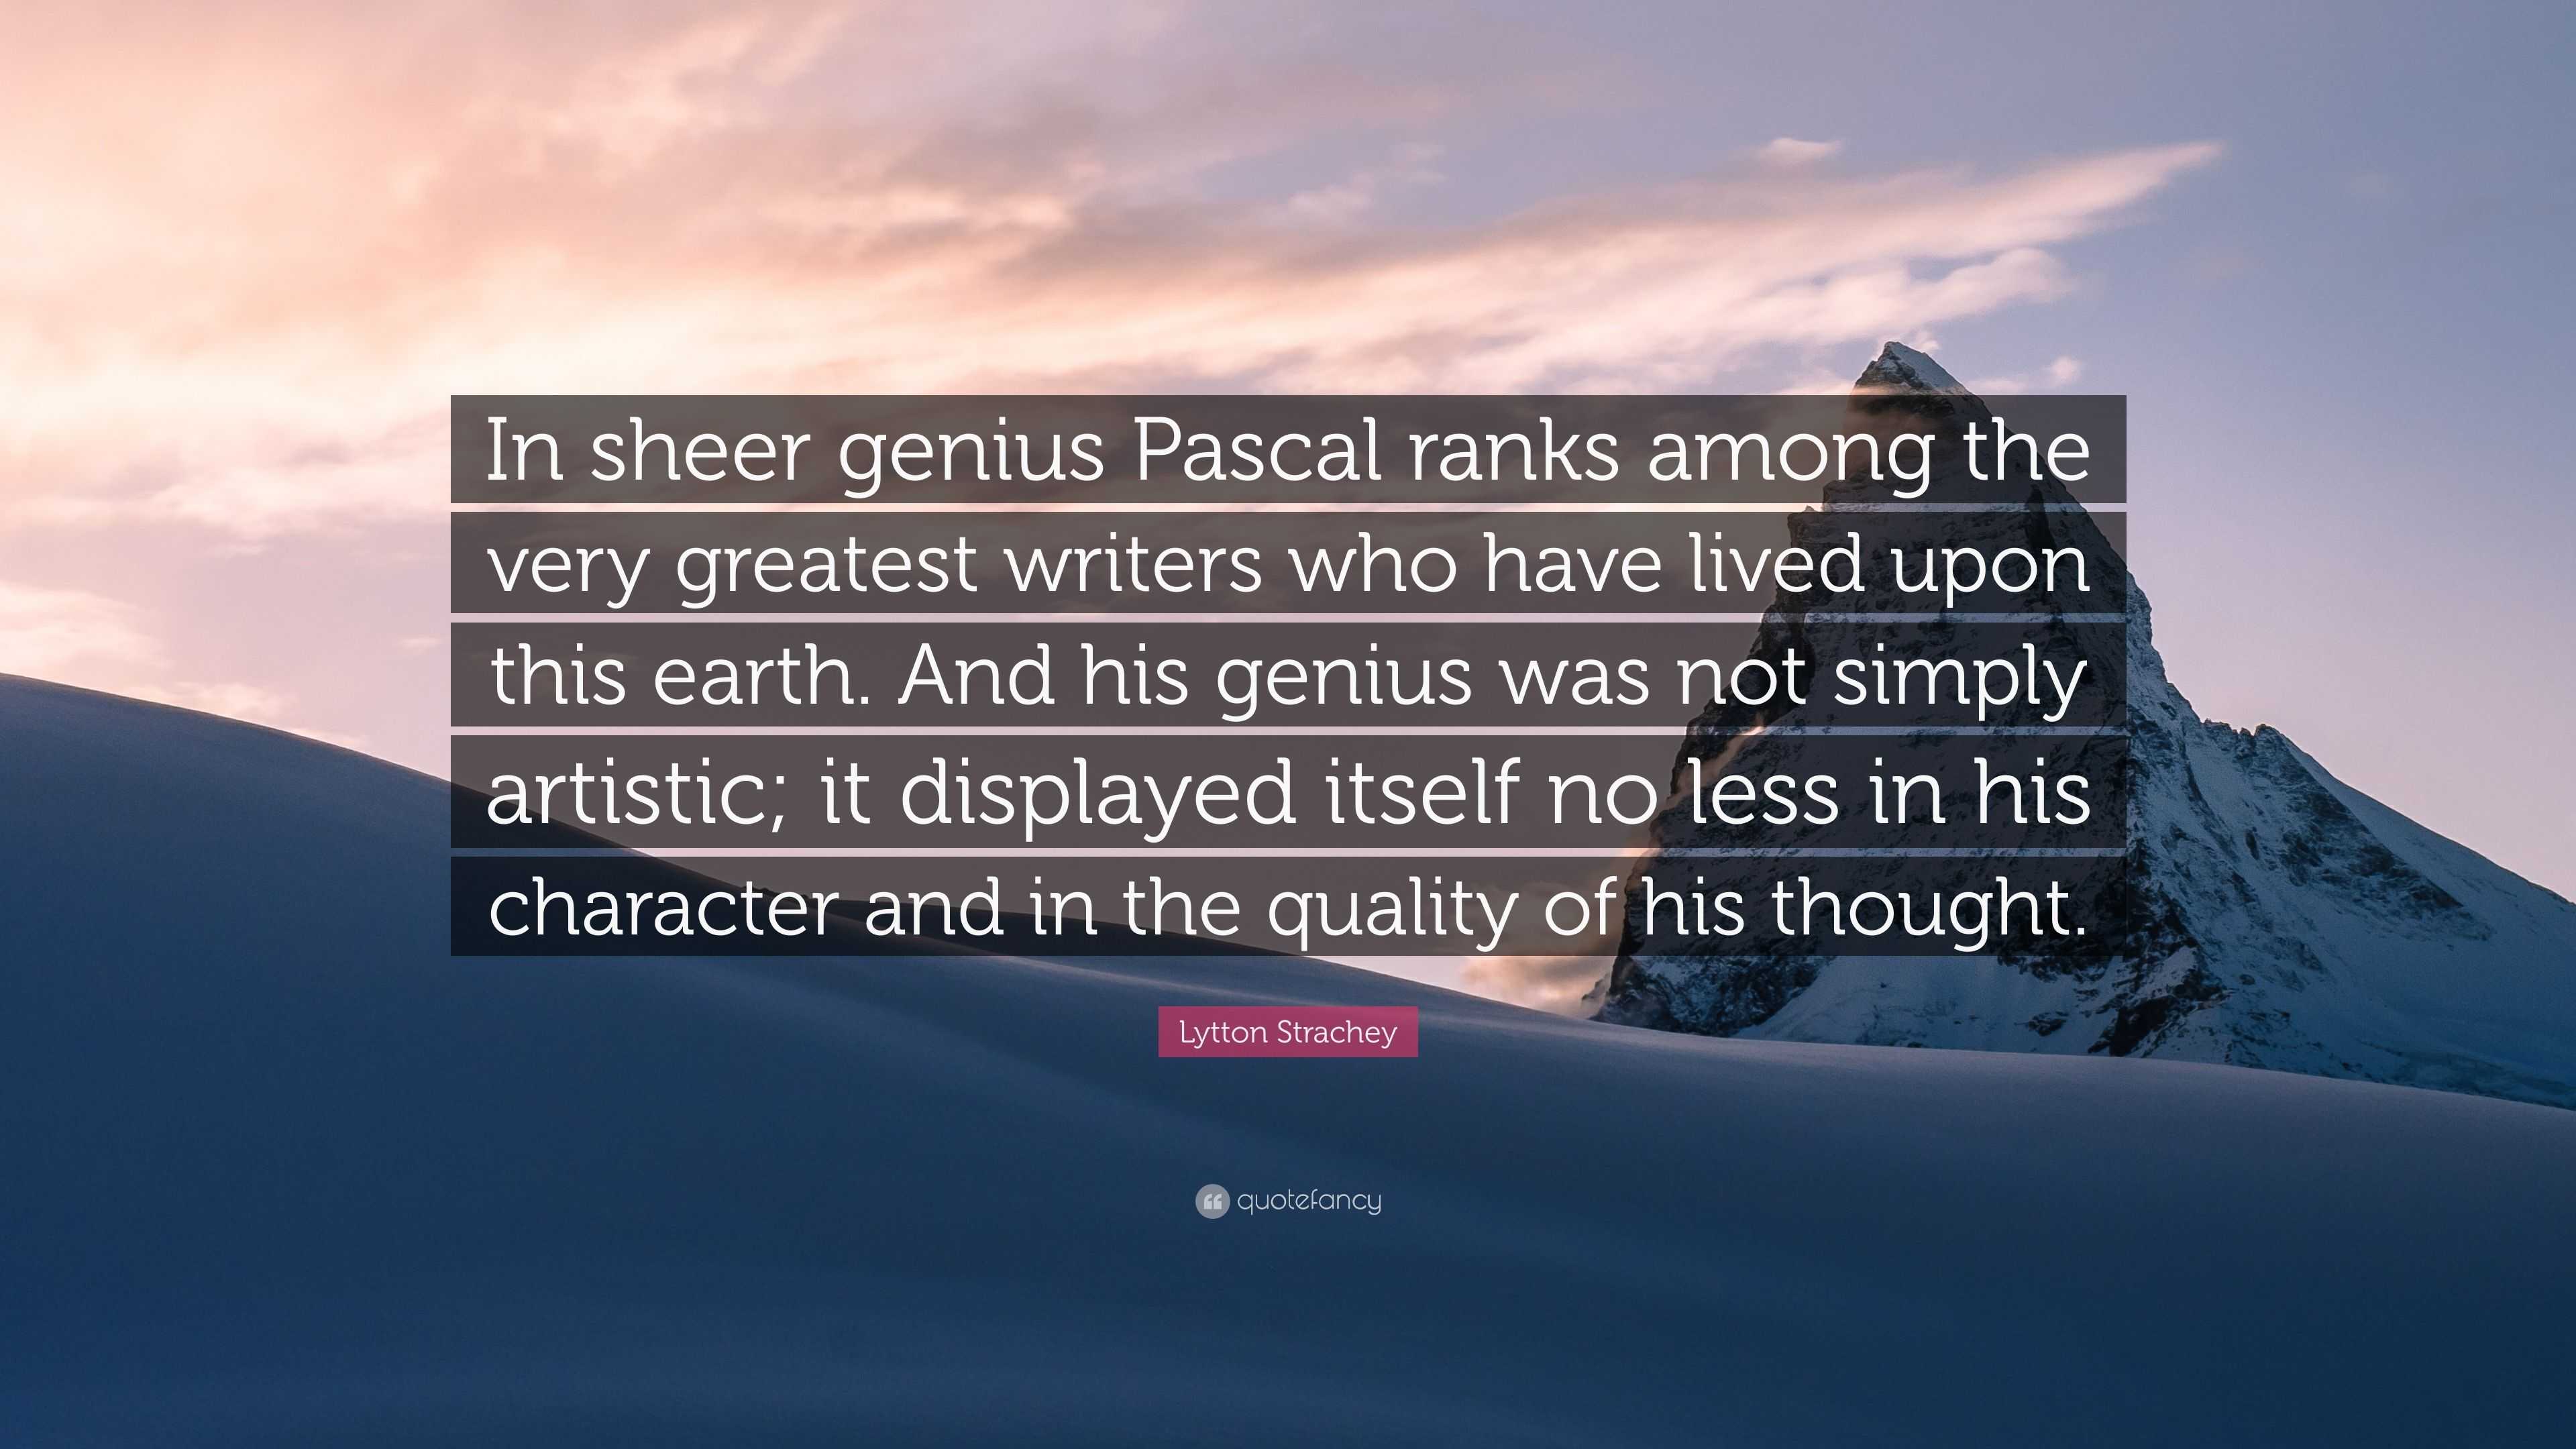 Lytton Strachey Quote: “In sheer genius Pascal ranks among the very  greatest writers who have lived upon this earth. And his genius was not  simp”